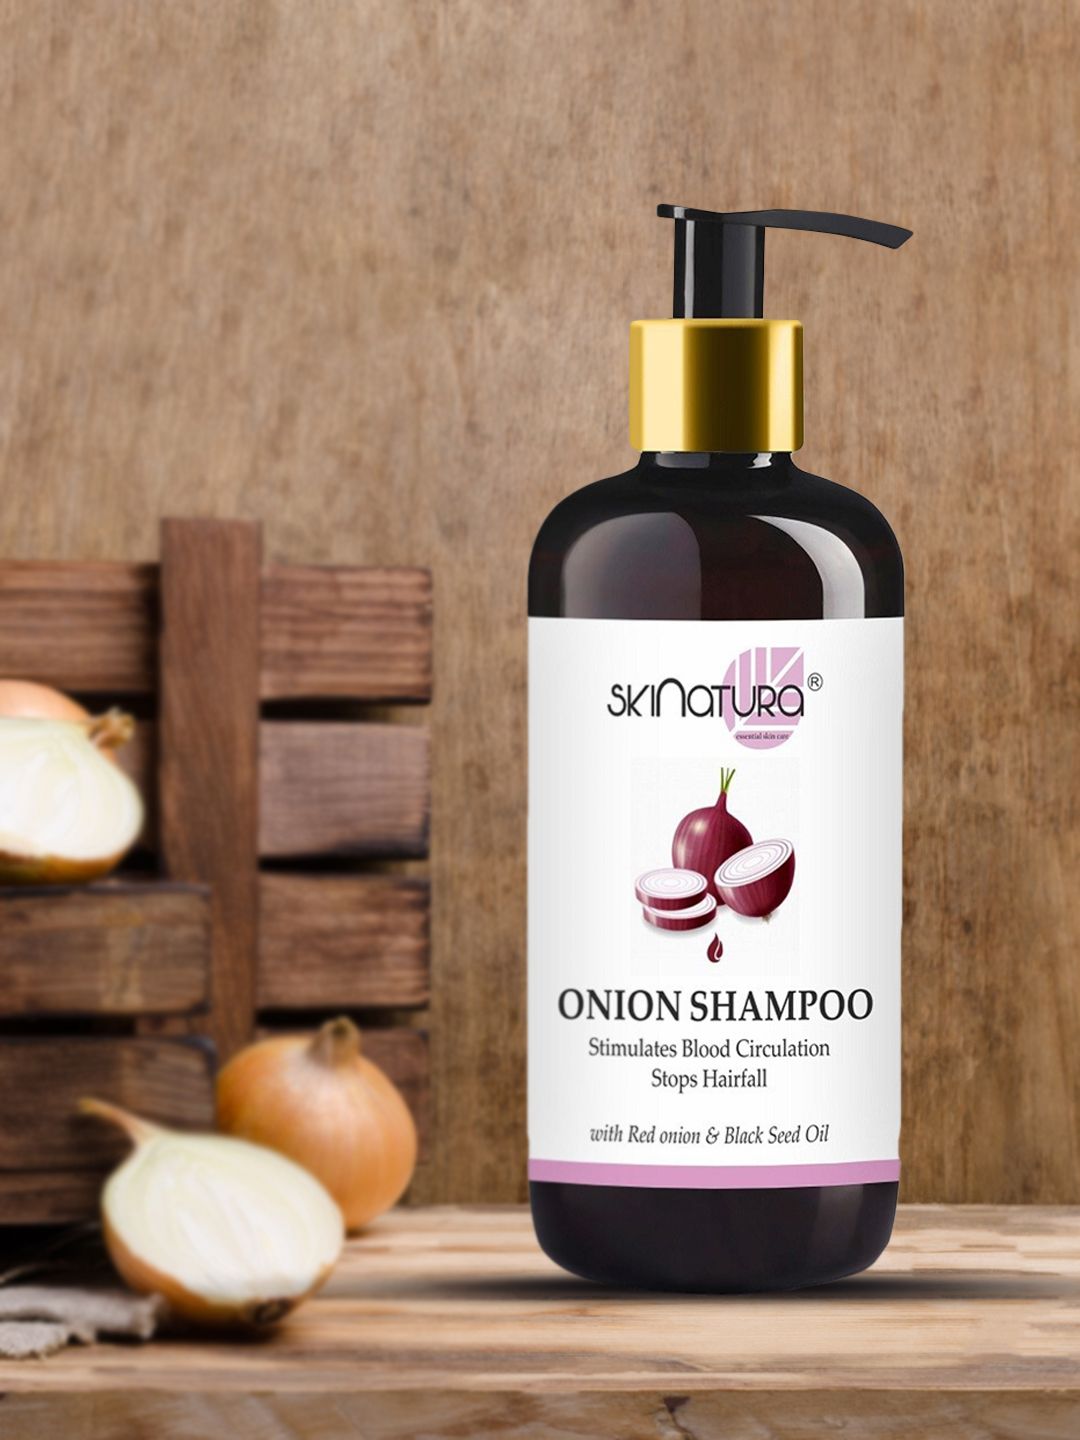 Skinatura Set of Onion & Activated Charcoal Detox Shampoo Price in India